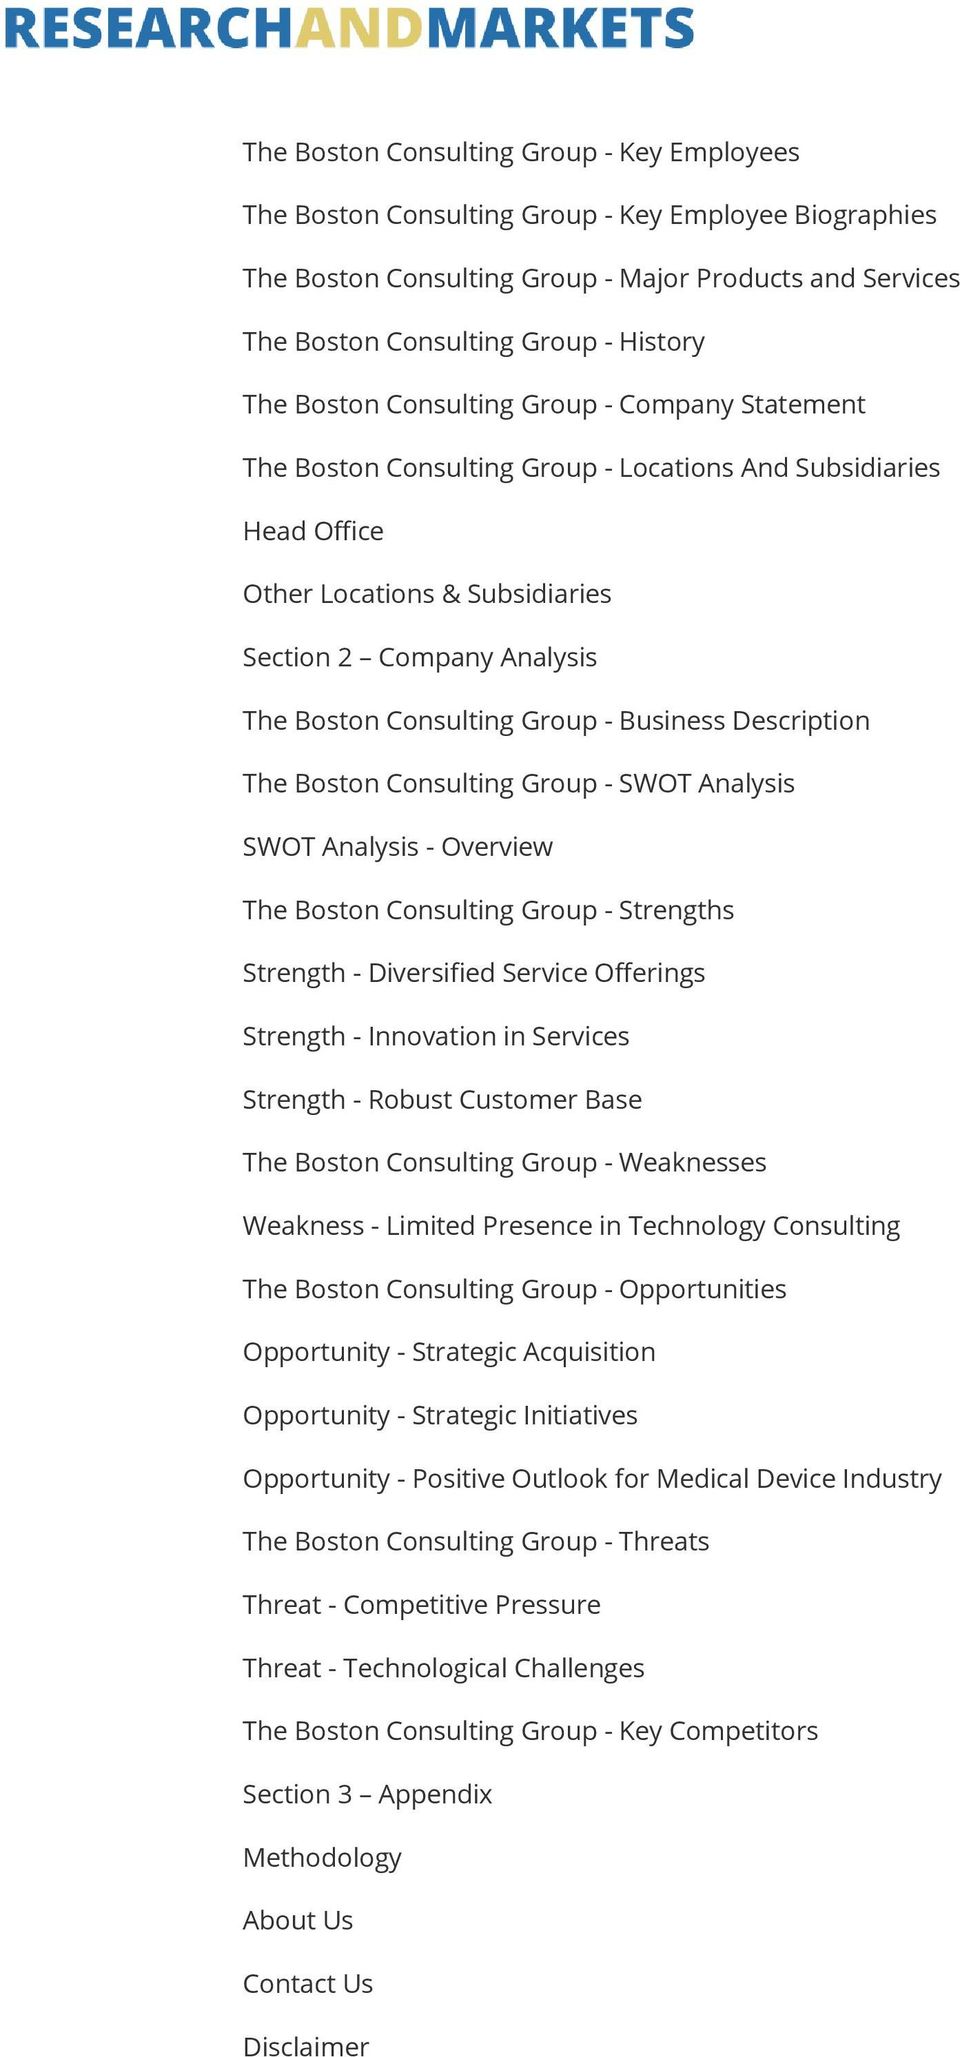 - Business Description The Boston Consulting Group - SWOT Analysis SWOT Analysis - Overview The Boston Consulting Group - Strengths Strength - Diversified Service Offerings Strength - Innovation in